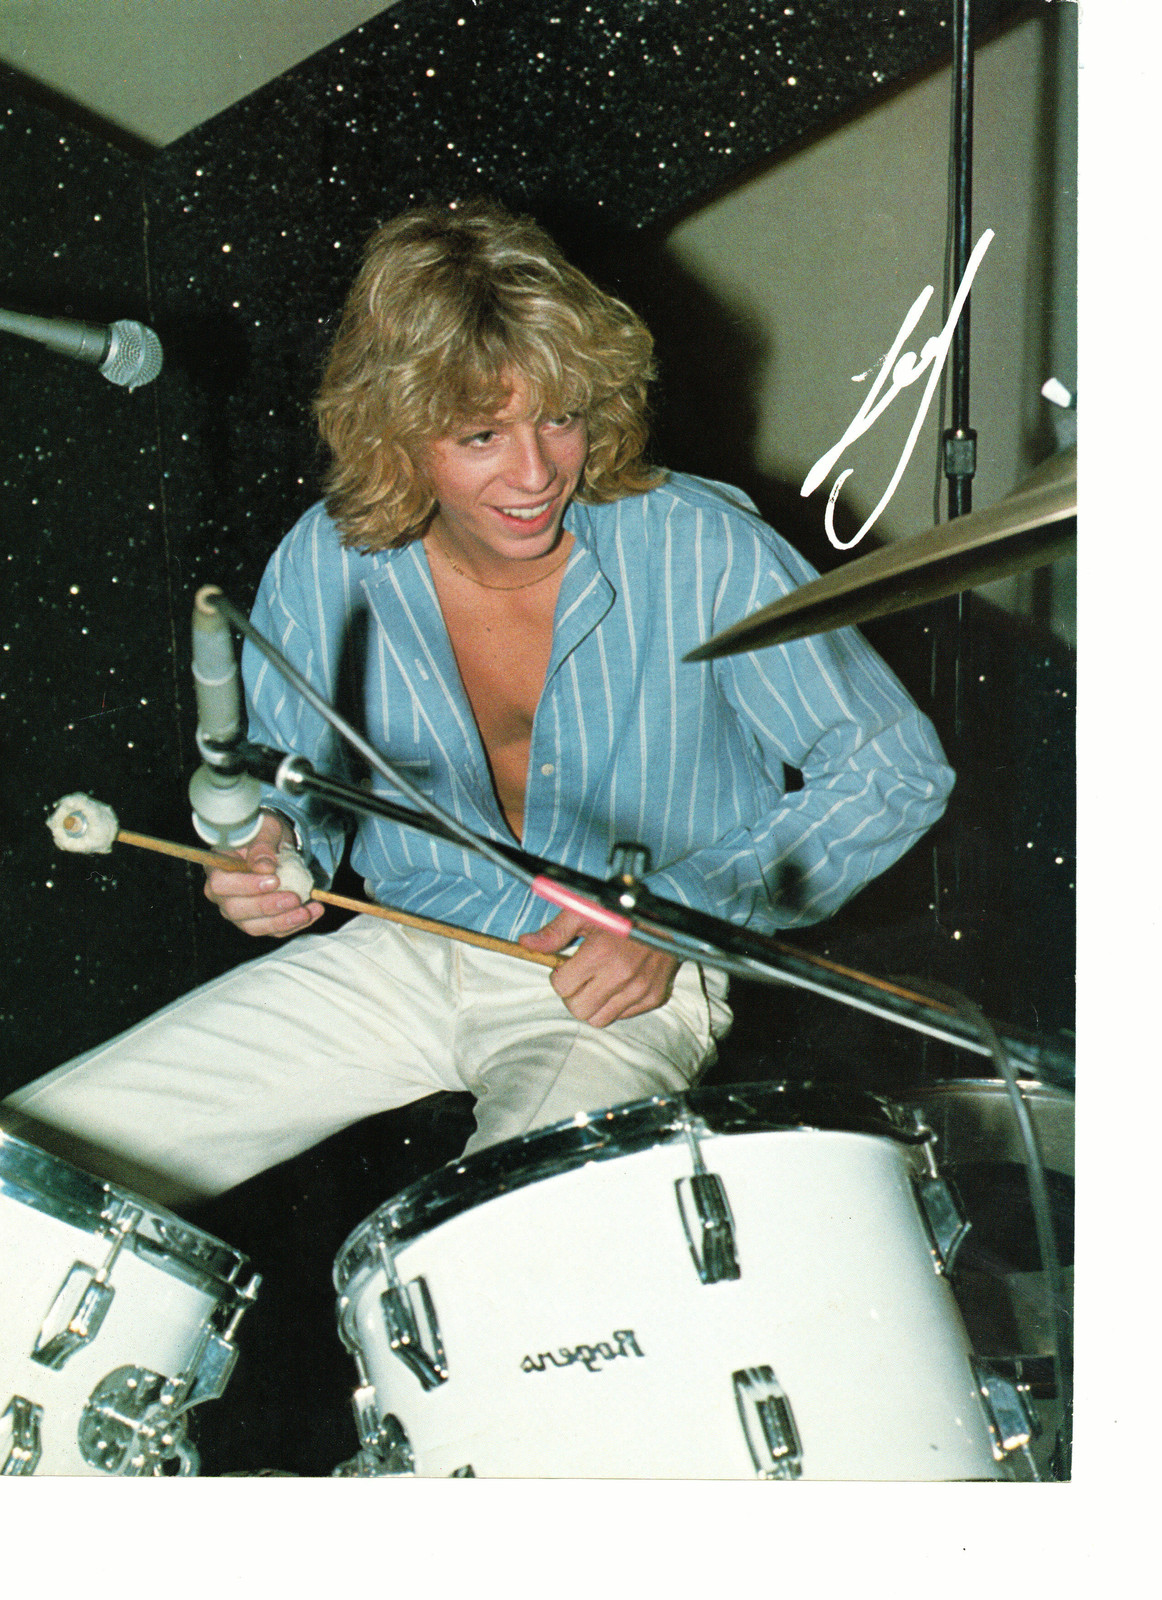 Leif Garrett teen magazine pinup clipping playing the drums blue shirt 1970's - $3.50